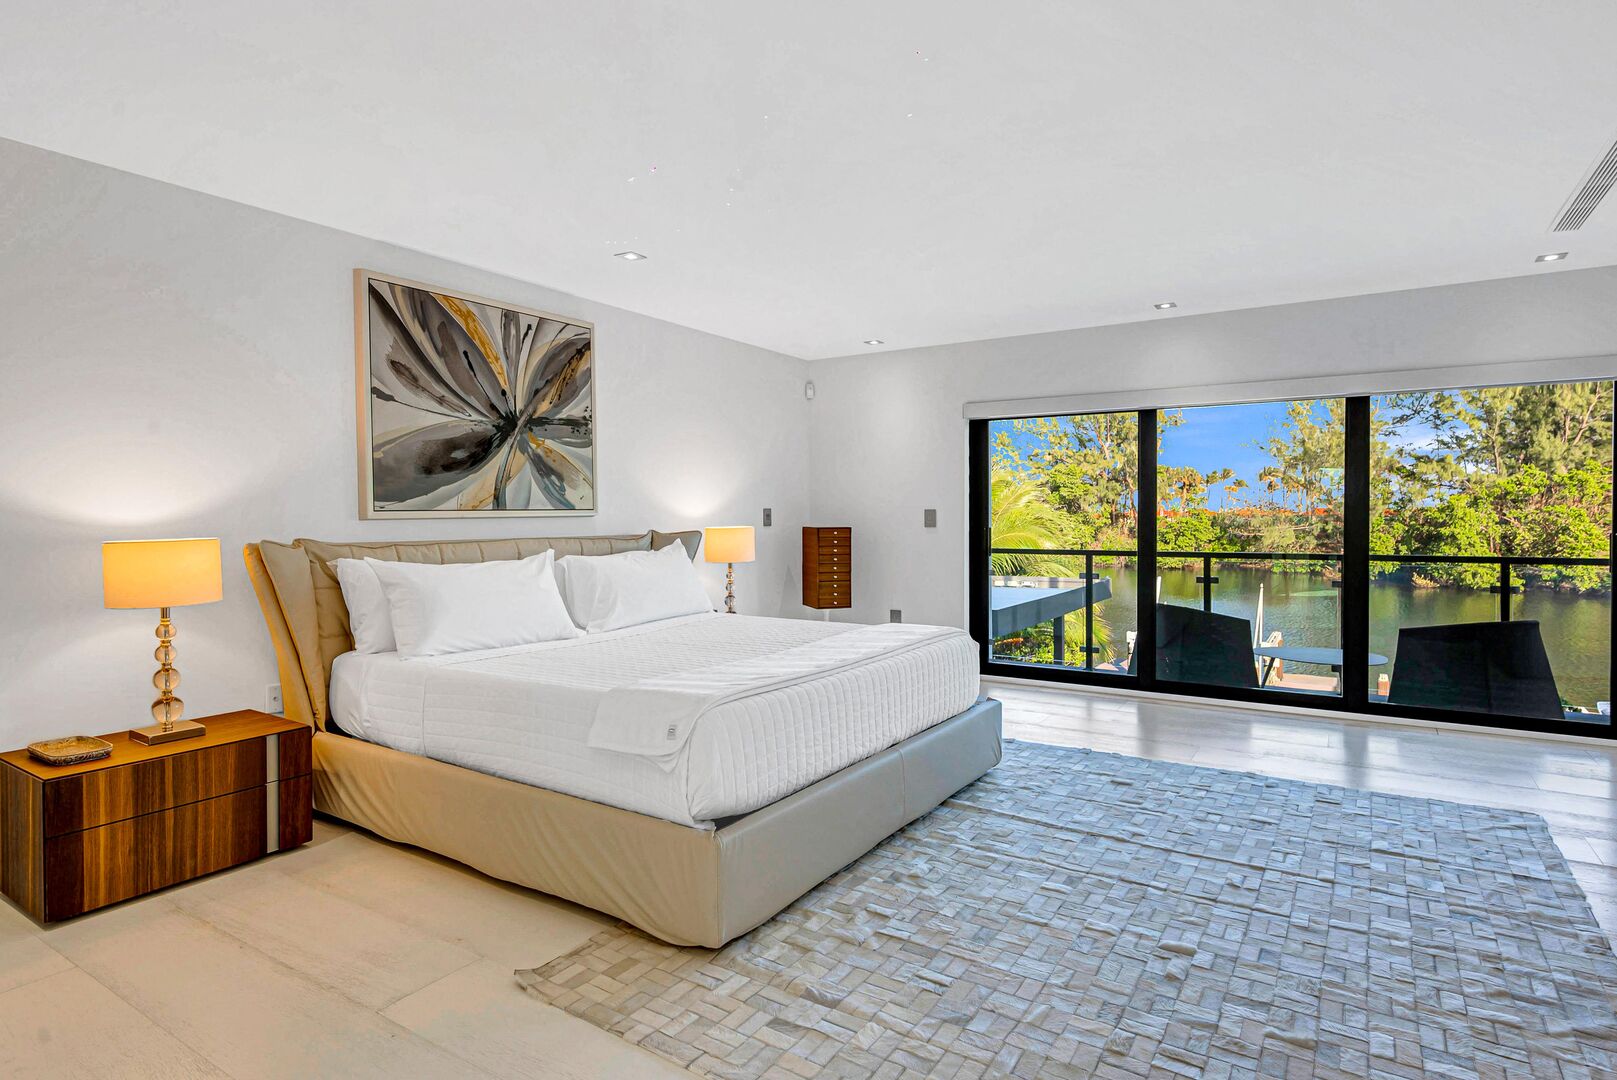 The primary bedroom with its balcony is overlooking the heated pool and the Mayan Lake.